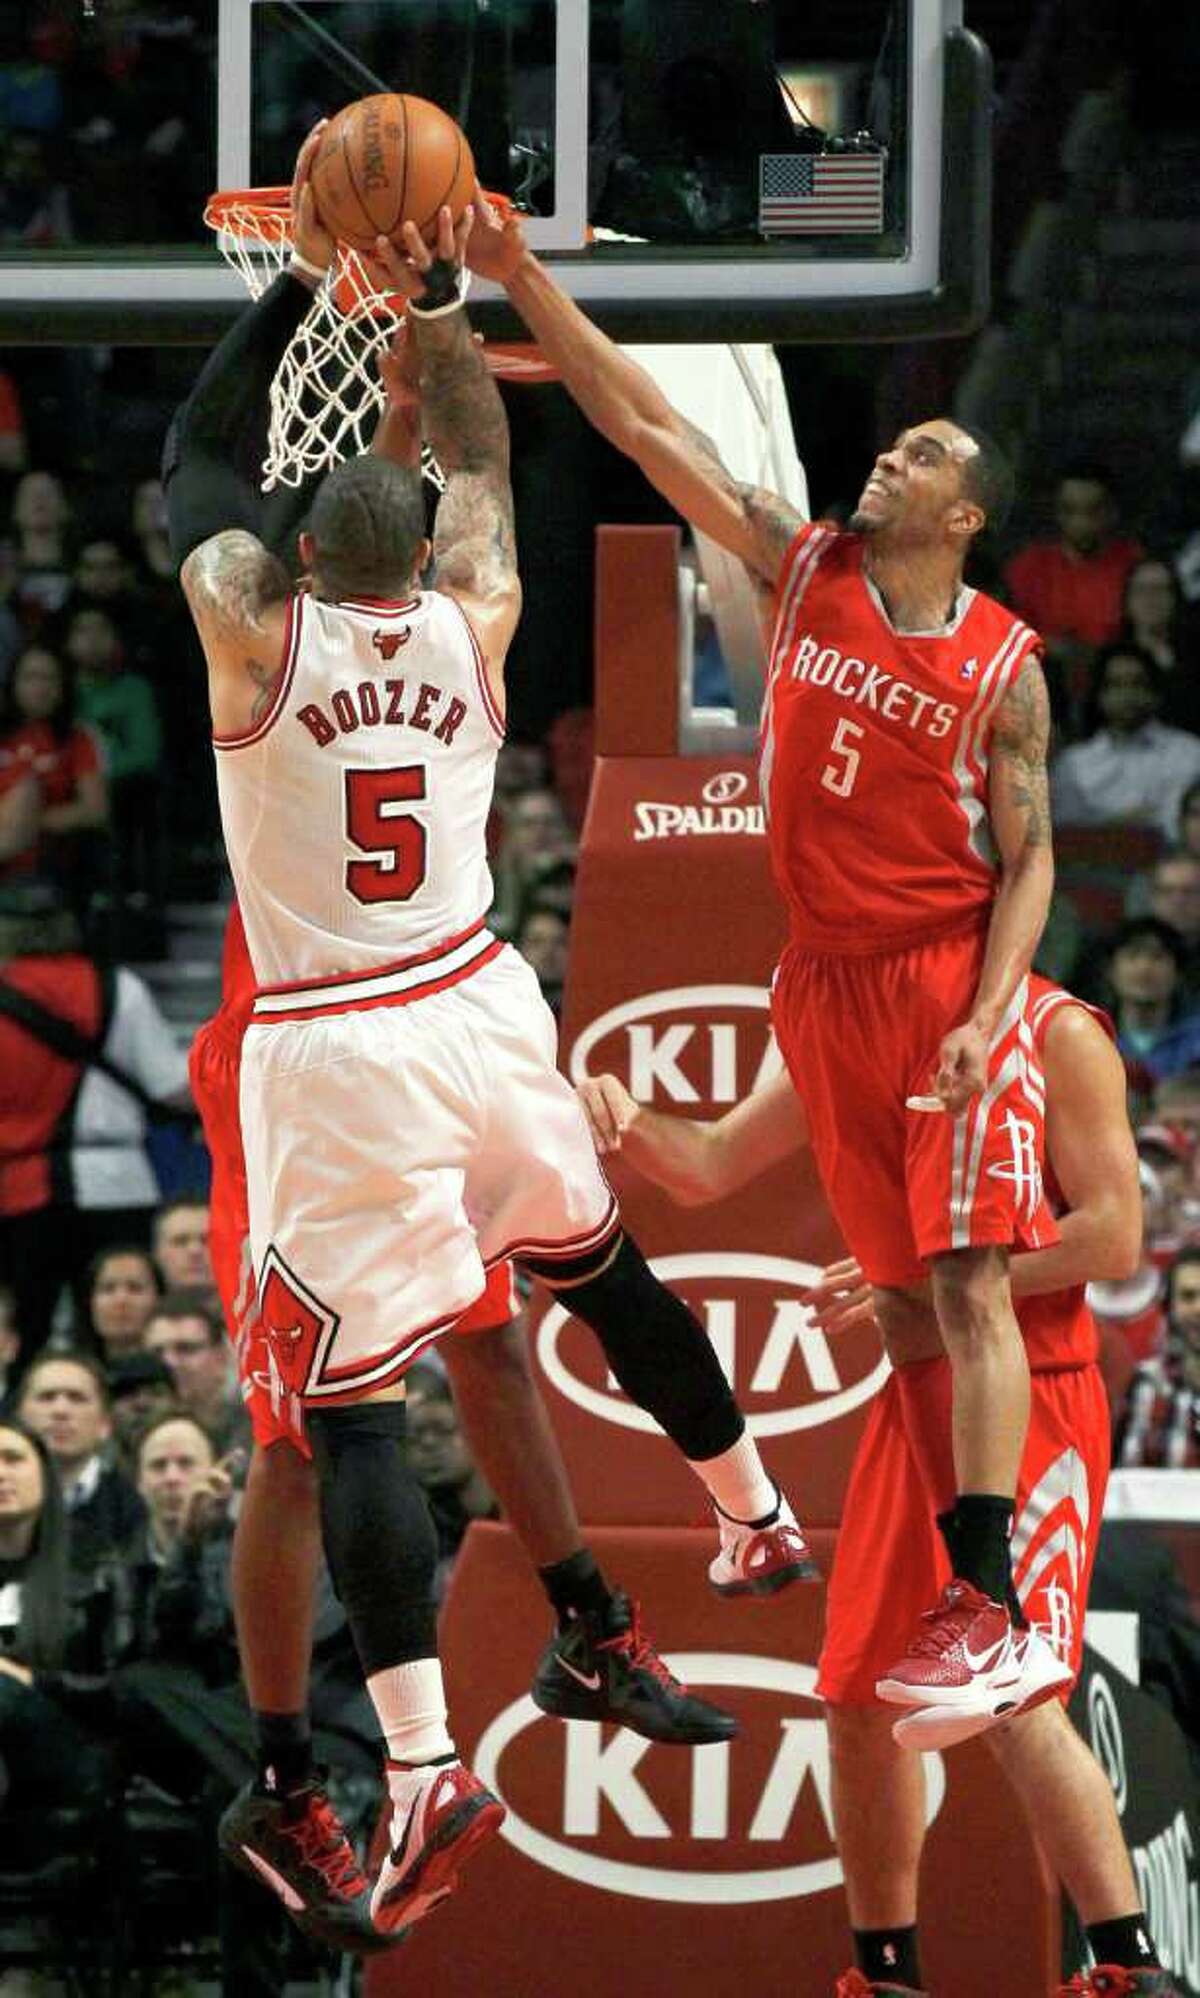 Houston Rockets guard Courtney Lee, right, blocks the shot of Chicago Bulls forward Carlos Boozer during the first half of an NBA basketball game Monday, April 2, 2012, in Chicago. (AP Photo/Charles Rex Arbogast)